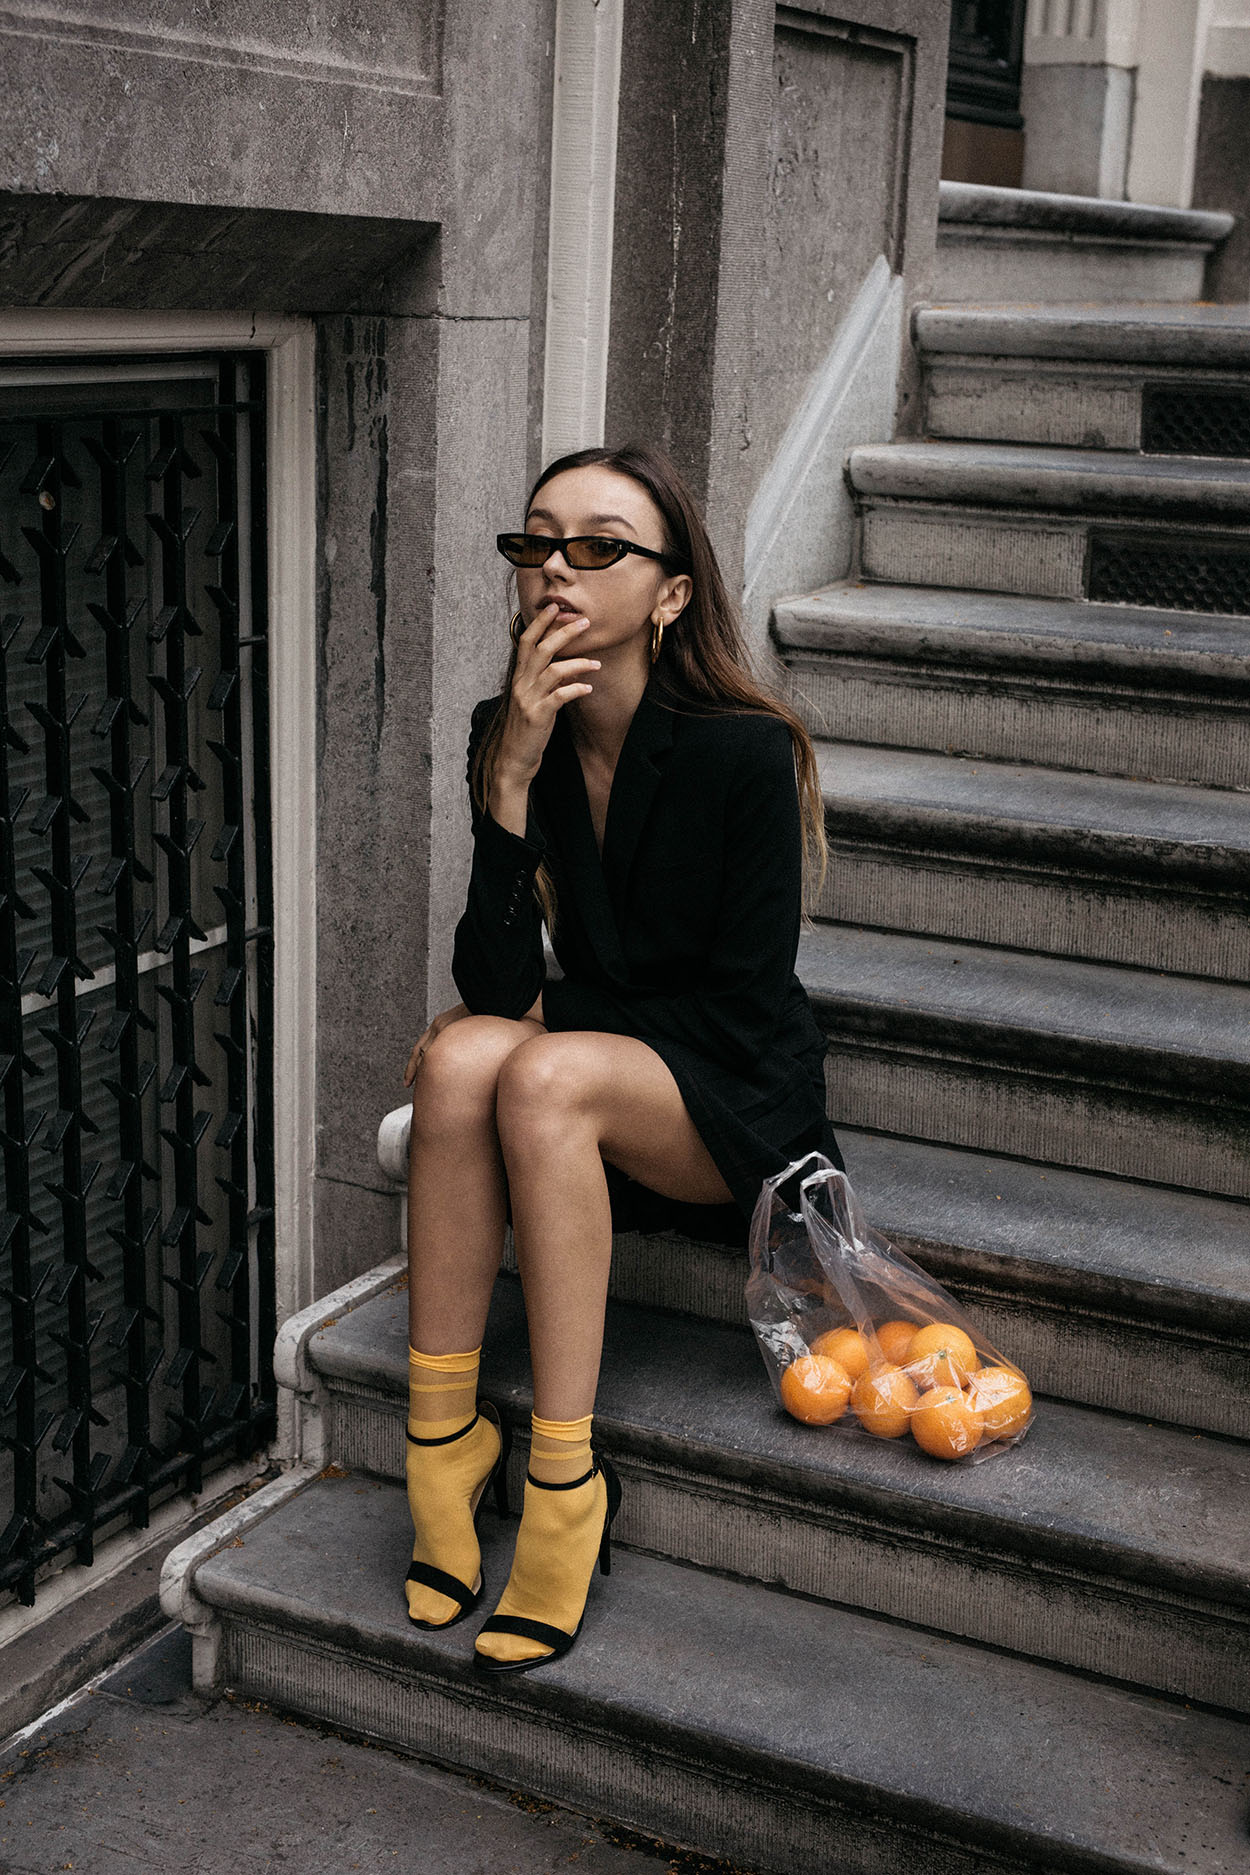 bonceptual-editorial-balenciaga-2018-sunglasses-oranges-in-plastic-bag-bright-yellow-socks-with-sandals-trend-outfit-ideas-7